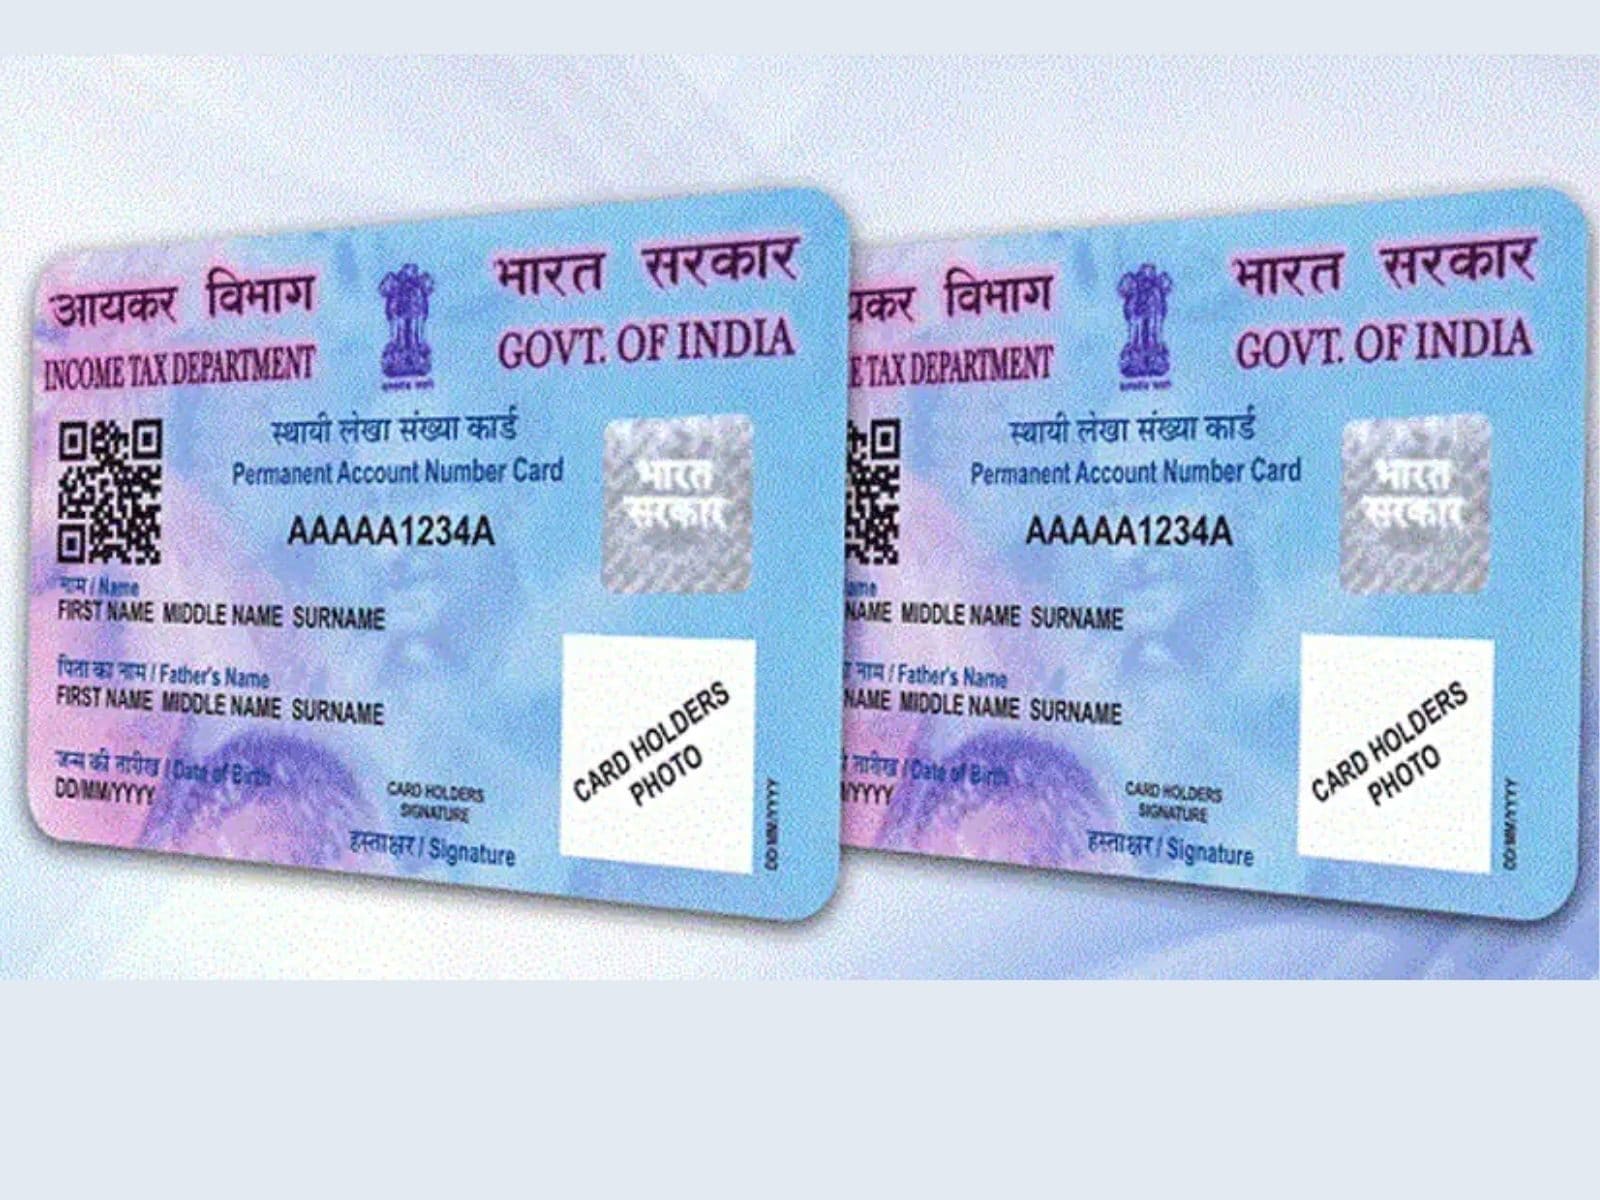 Lost your PAN card Heres how you can reapply for it  Latest News India   Hindustan Times